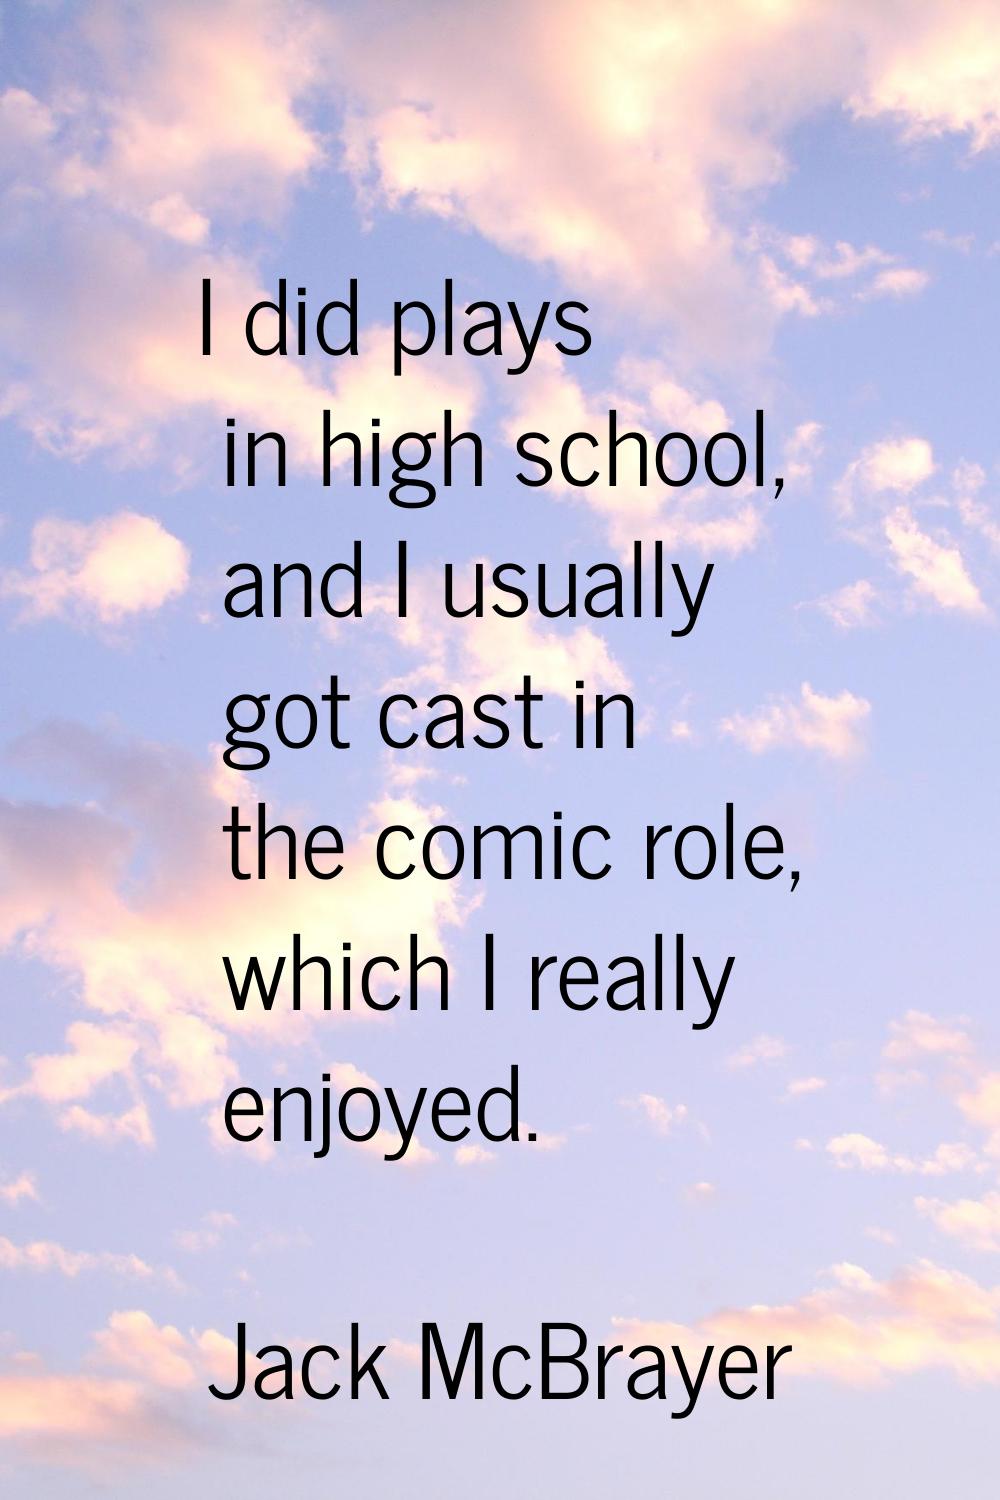 I did plays in high school, and I usually got cast in the comic role, which I really enjoyed.